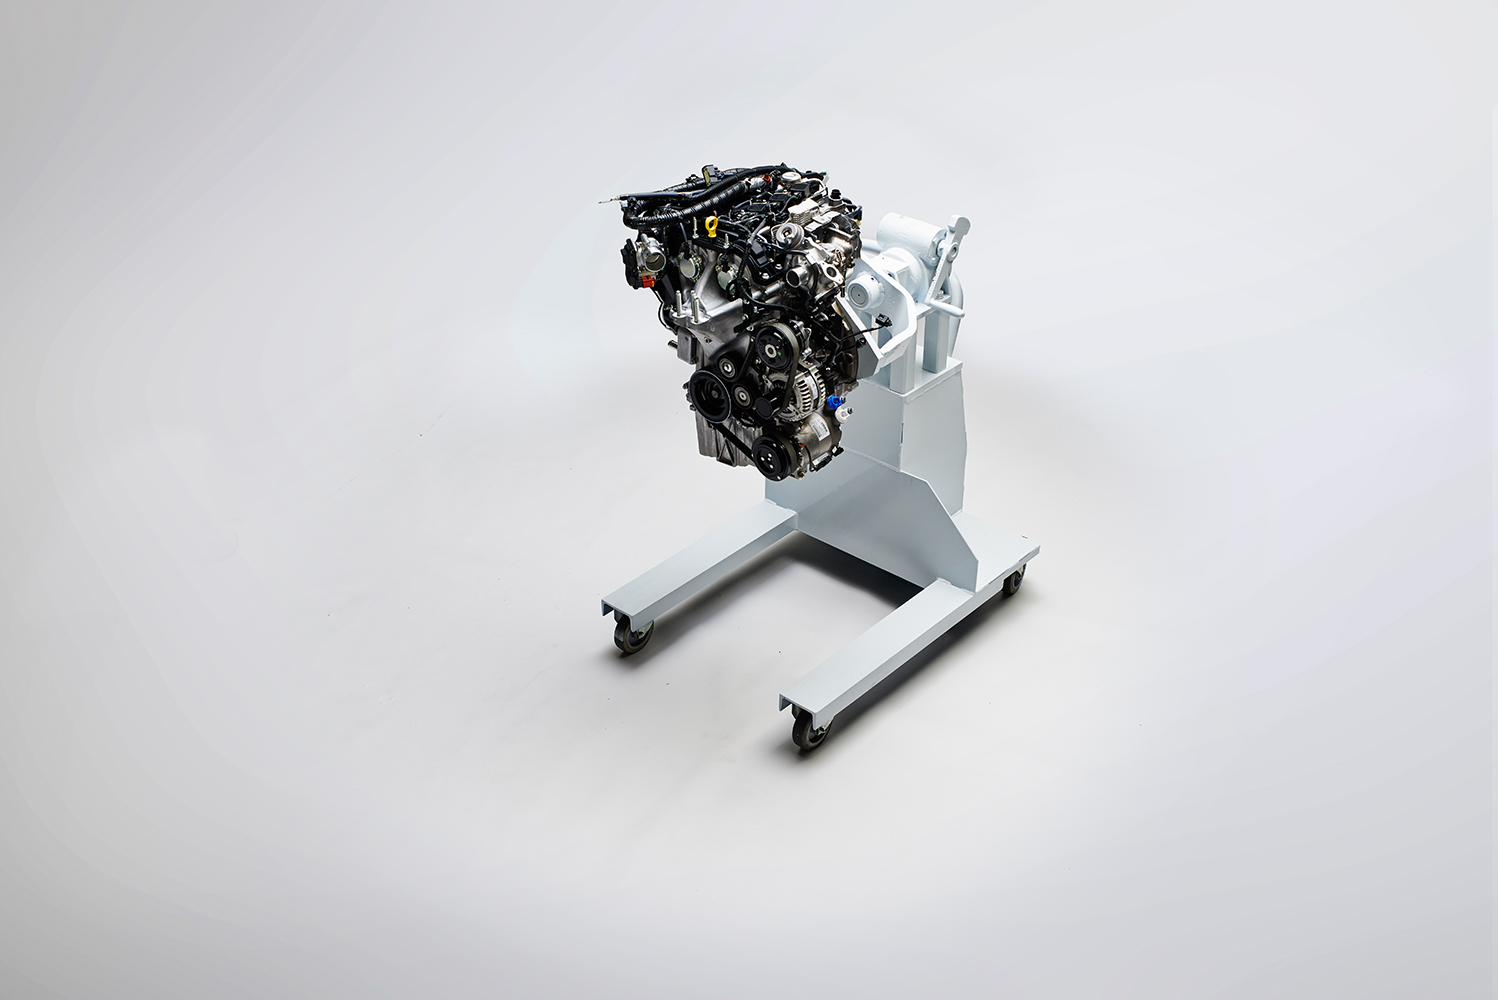 Ford Engine 2014.05.26_Industry_Ford_EngineOfTheYear_Complete